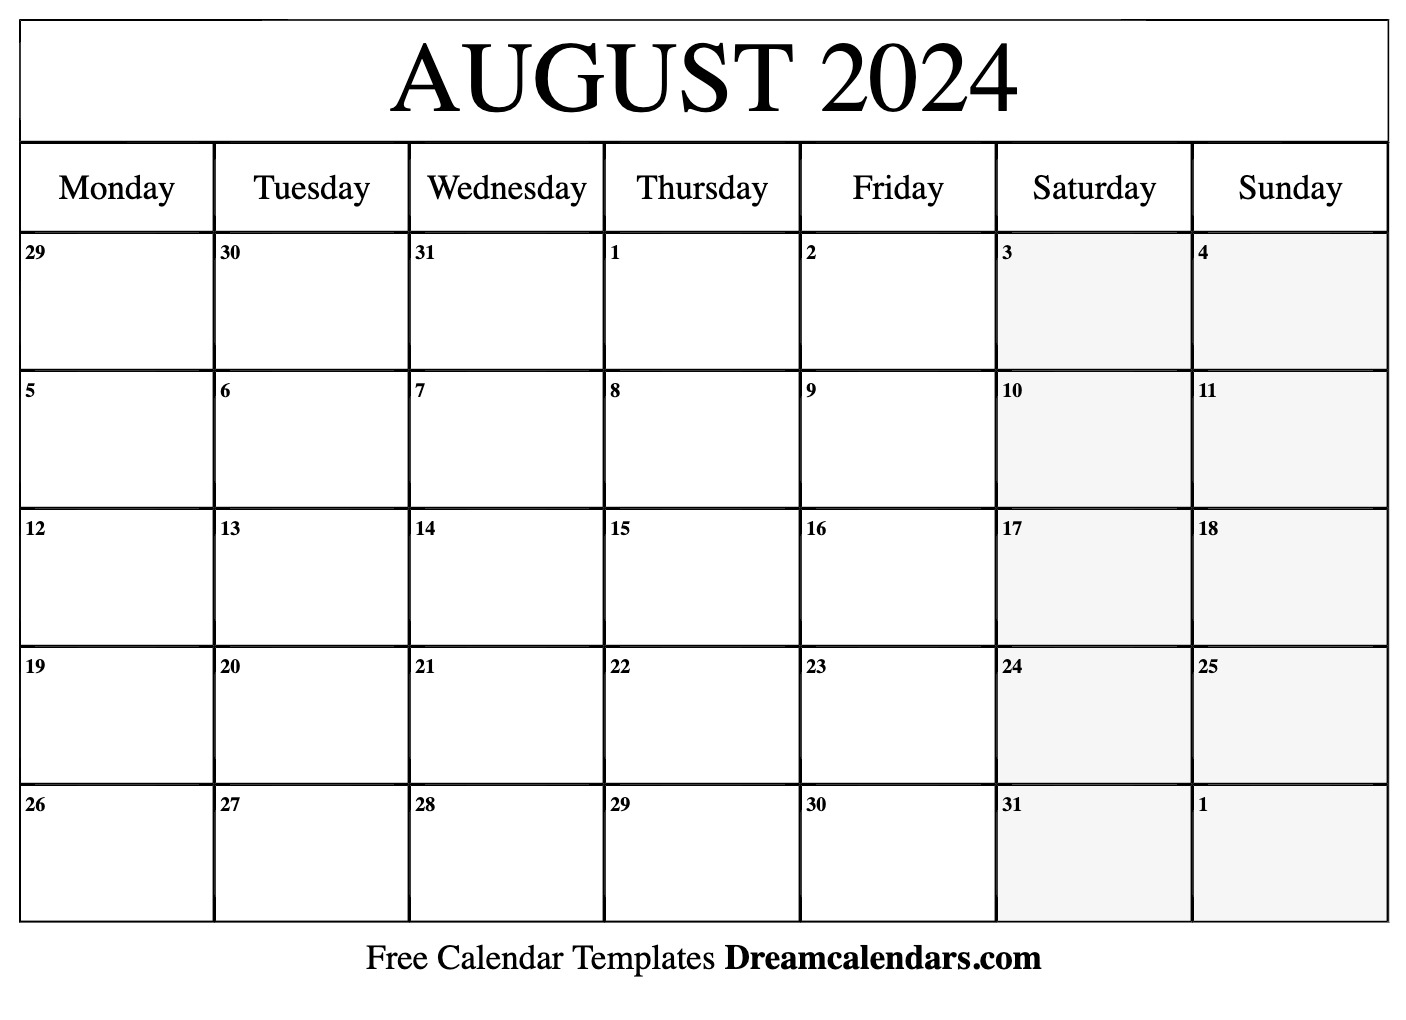 August 2024 Calendar | Free Blank Printable With Holidays for August 2024 Calendar Free Printable